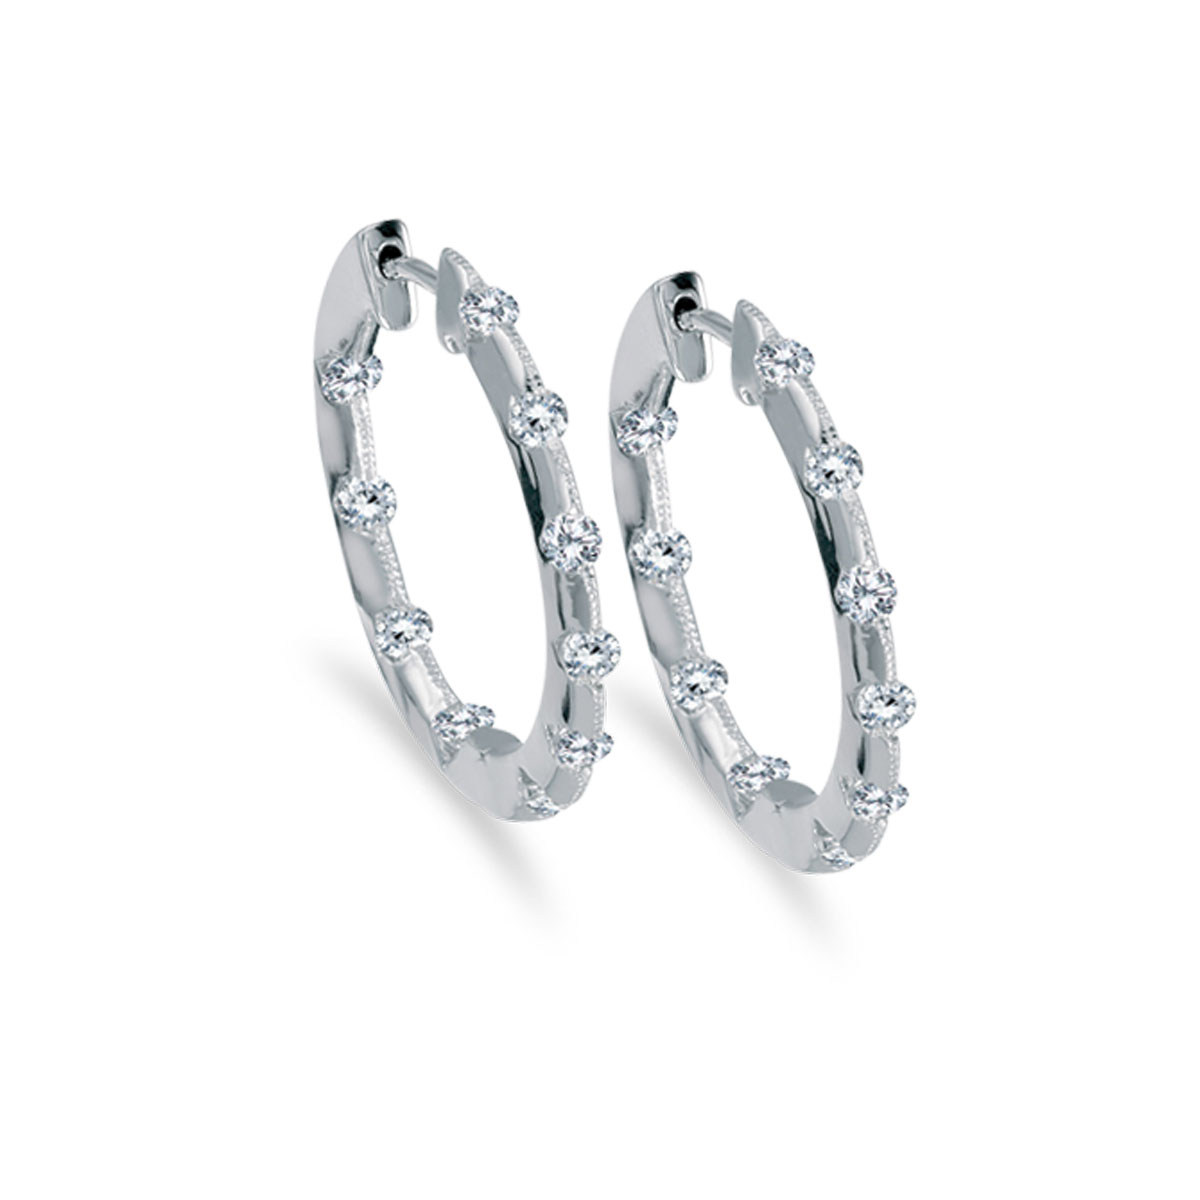 19 mm diamond inside/outside hoop earrings in beautiful 14k white gold. The perfect look for day ...